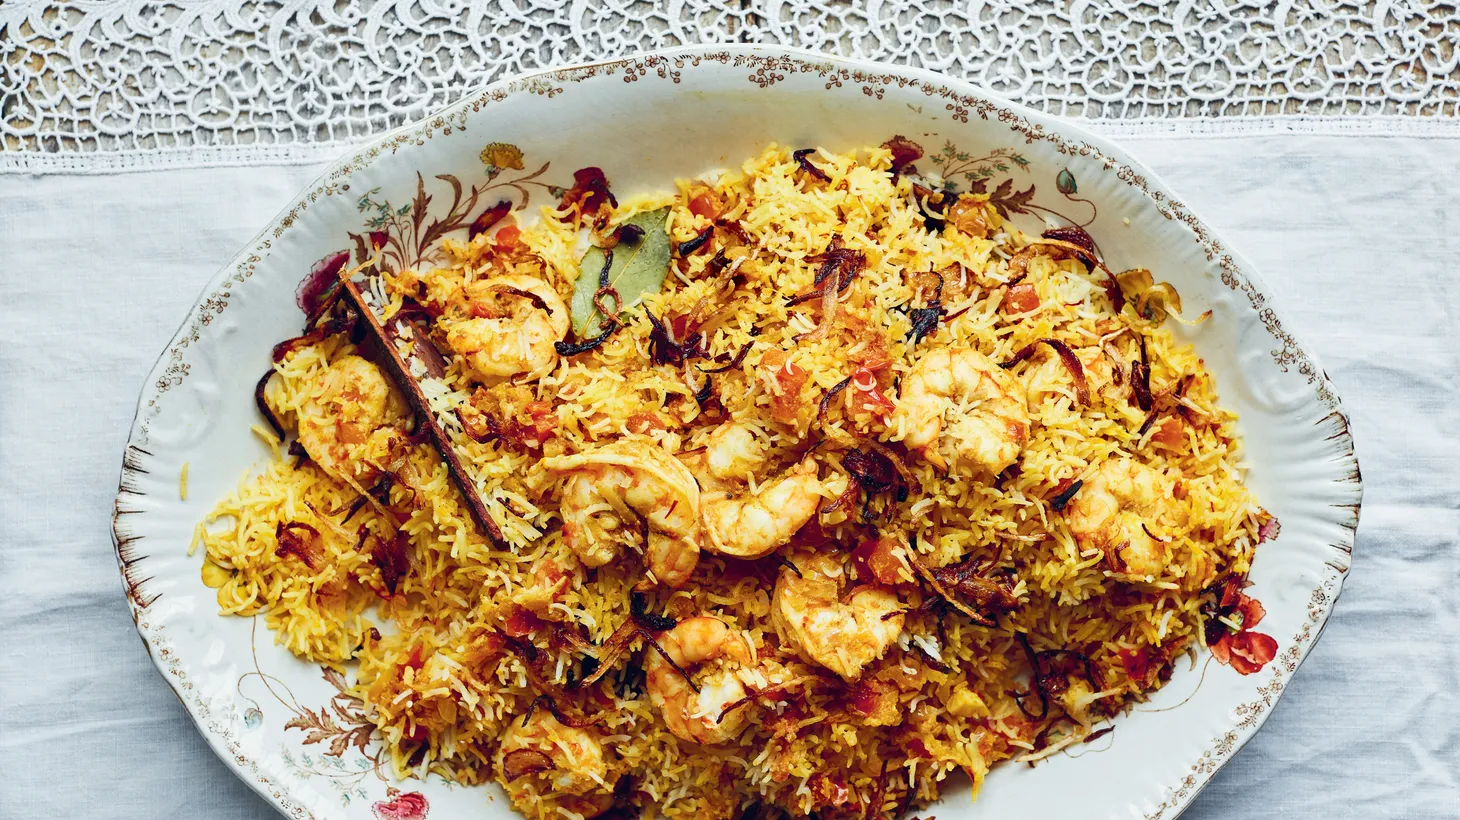 Asma Khan’s recipe for foolproof shrimp biryani is cataloged in a section of her book dubbed “Cooking for Your Future In-Laws.”